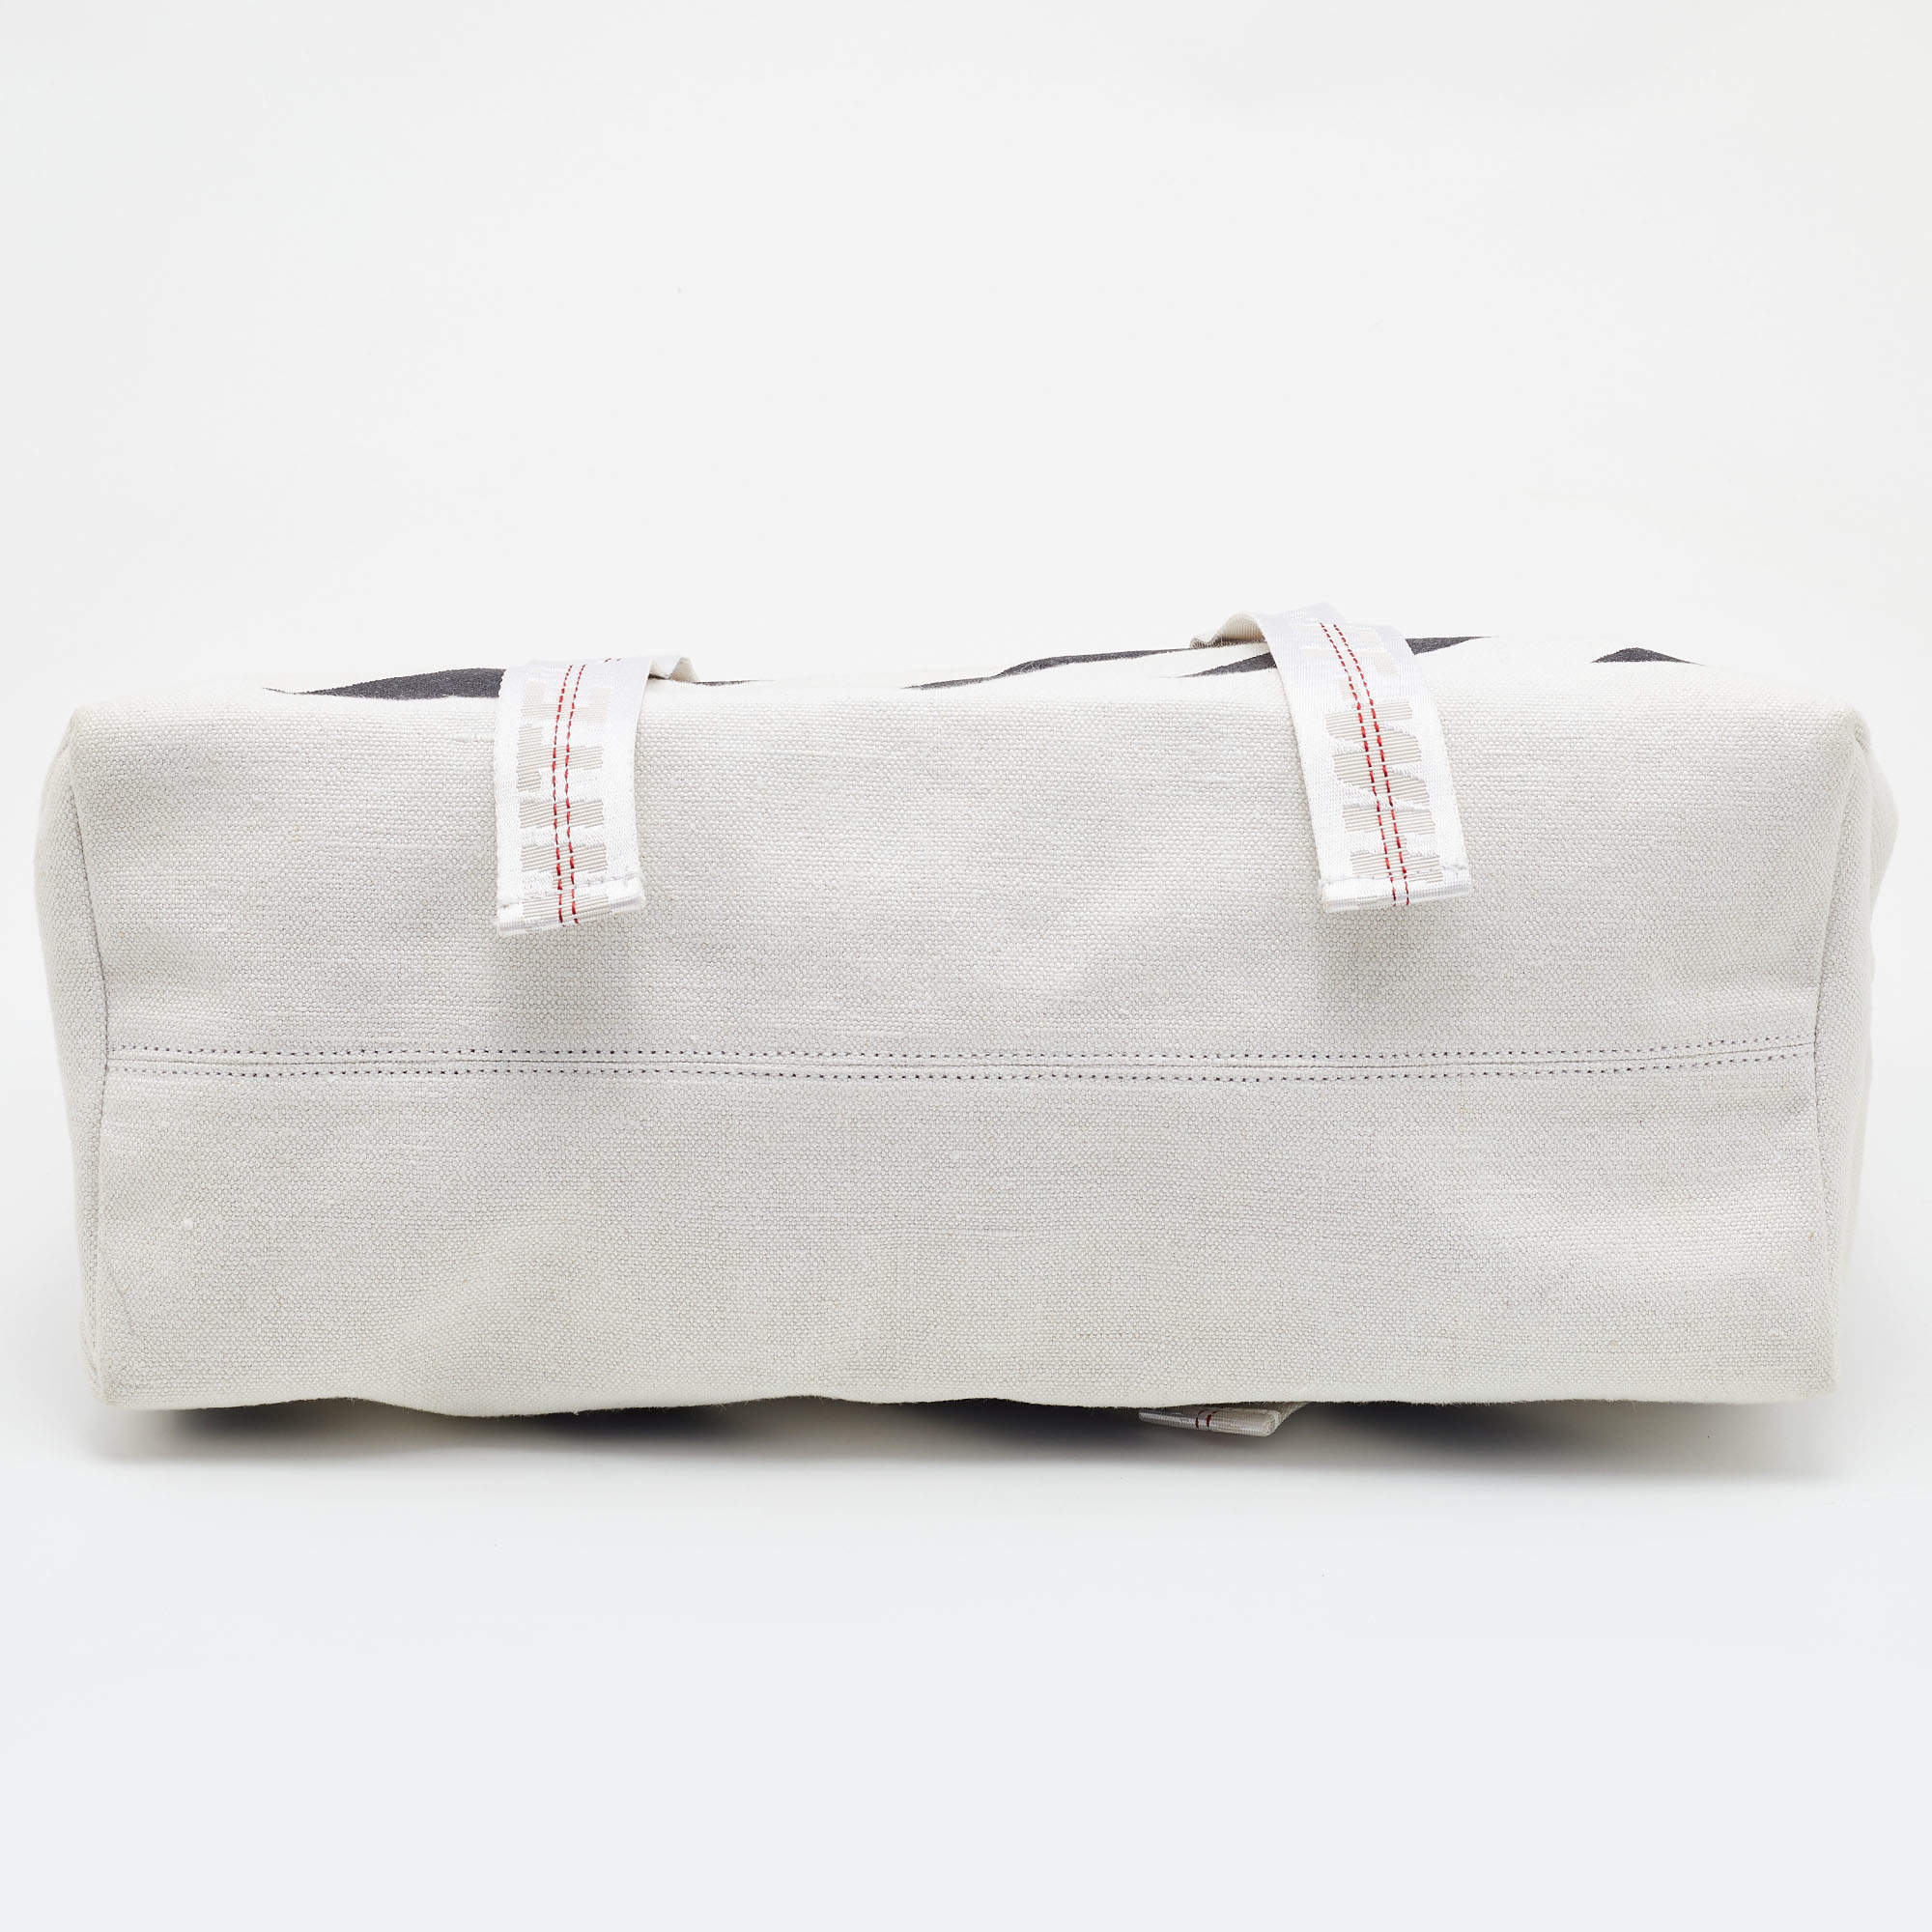 White And Black Diag Tote Bag - GBNY